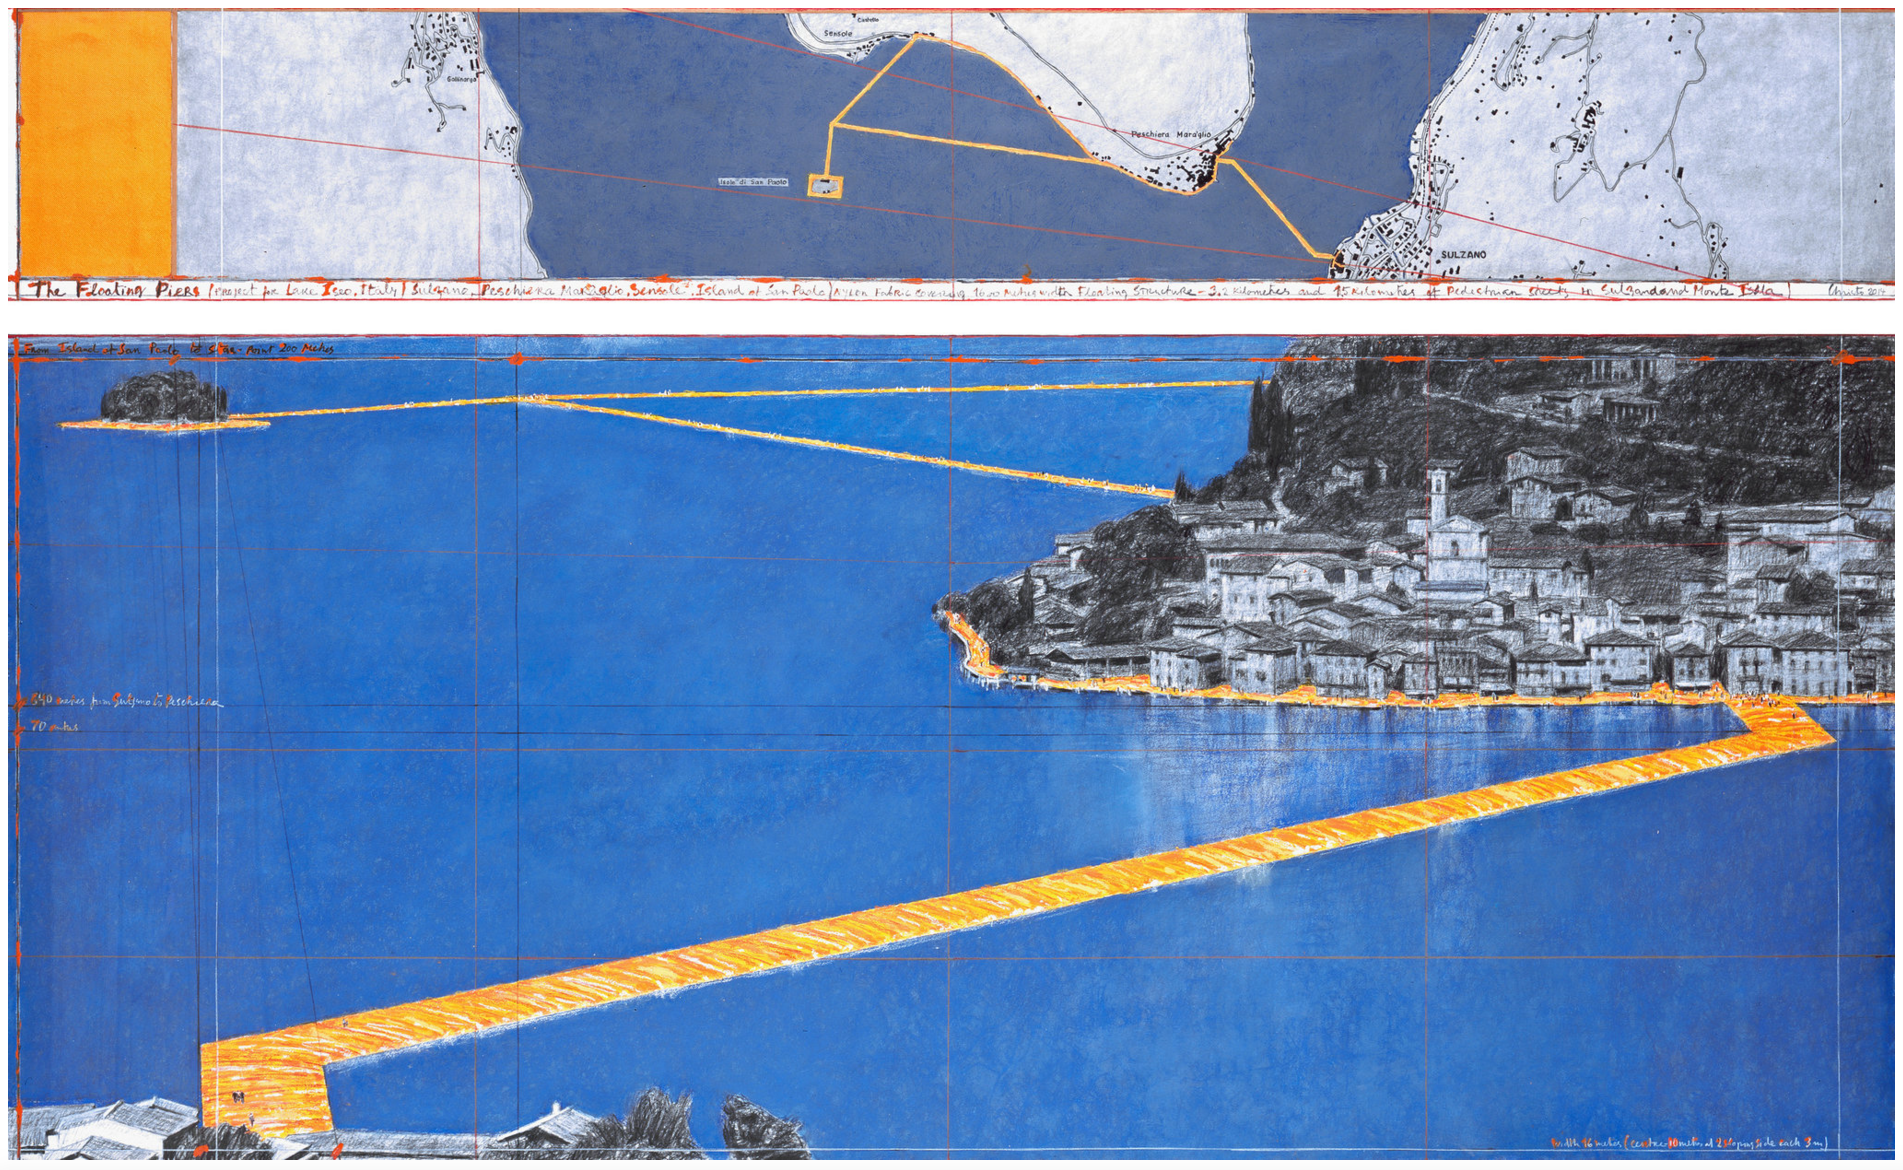 a mockup drawing of christo's latest large-scale art endeavor 